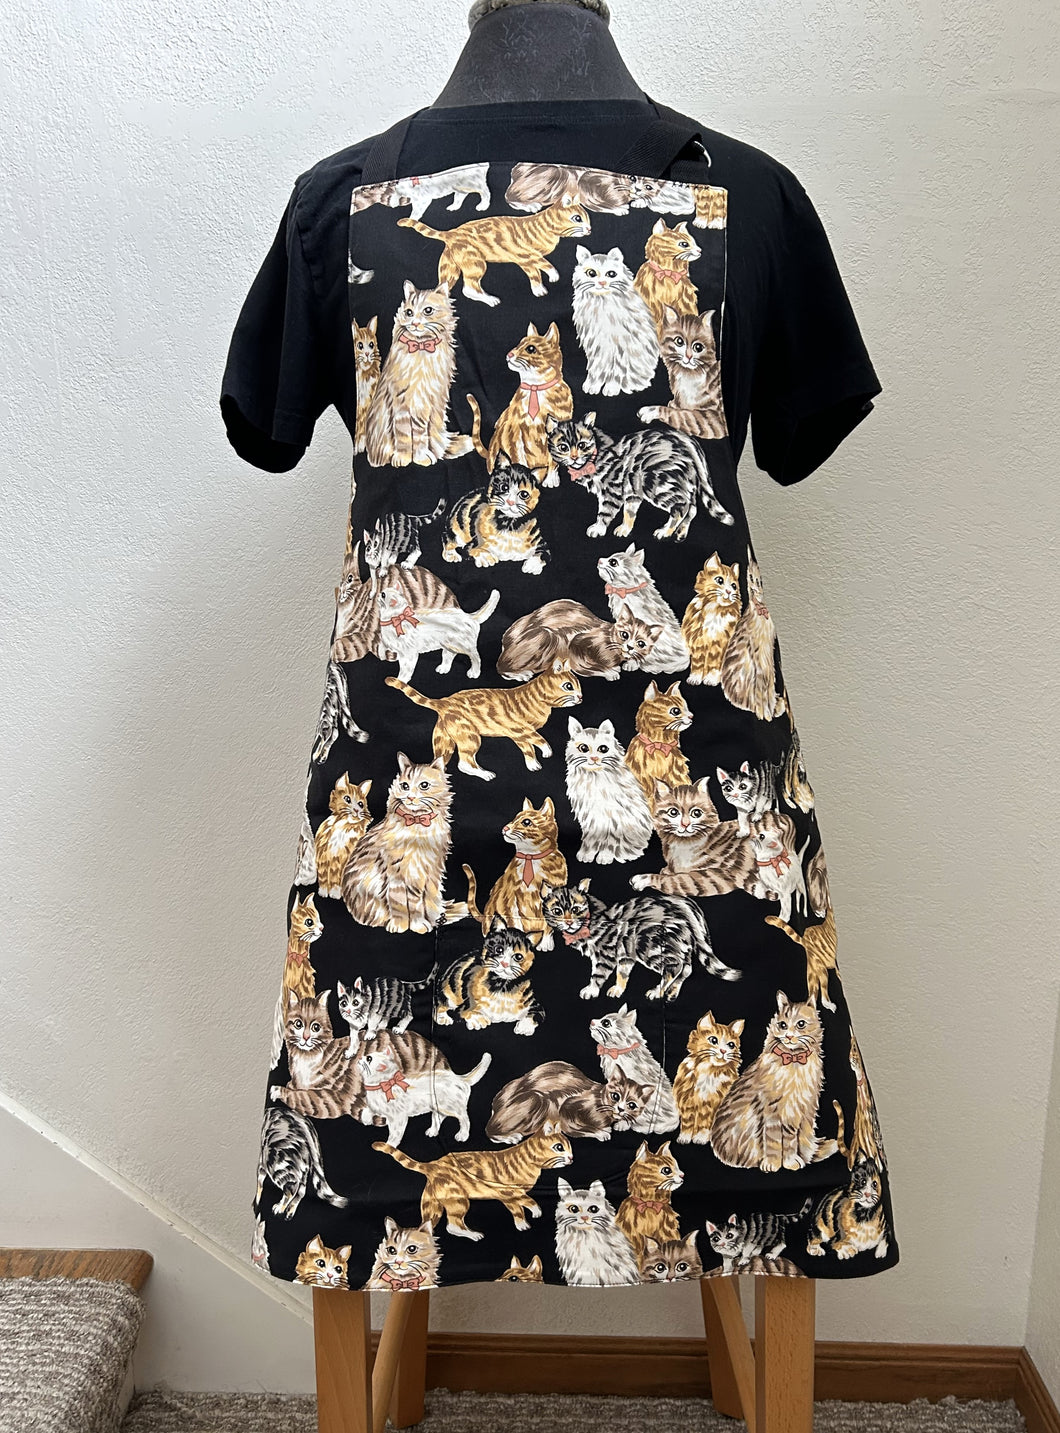 Cats in Varied Prints - Adult Aprons